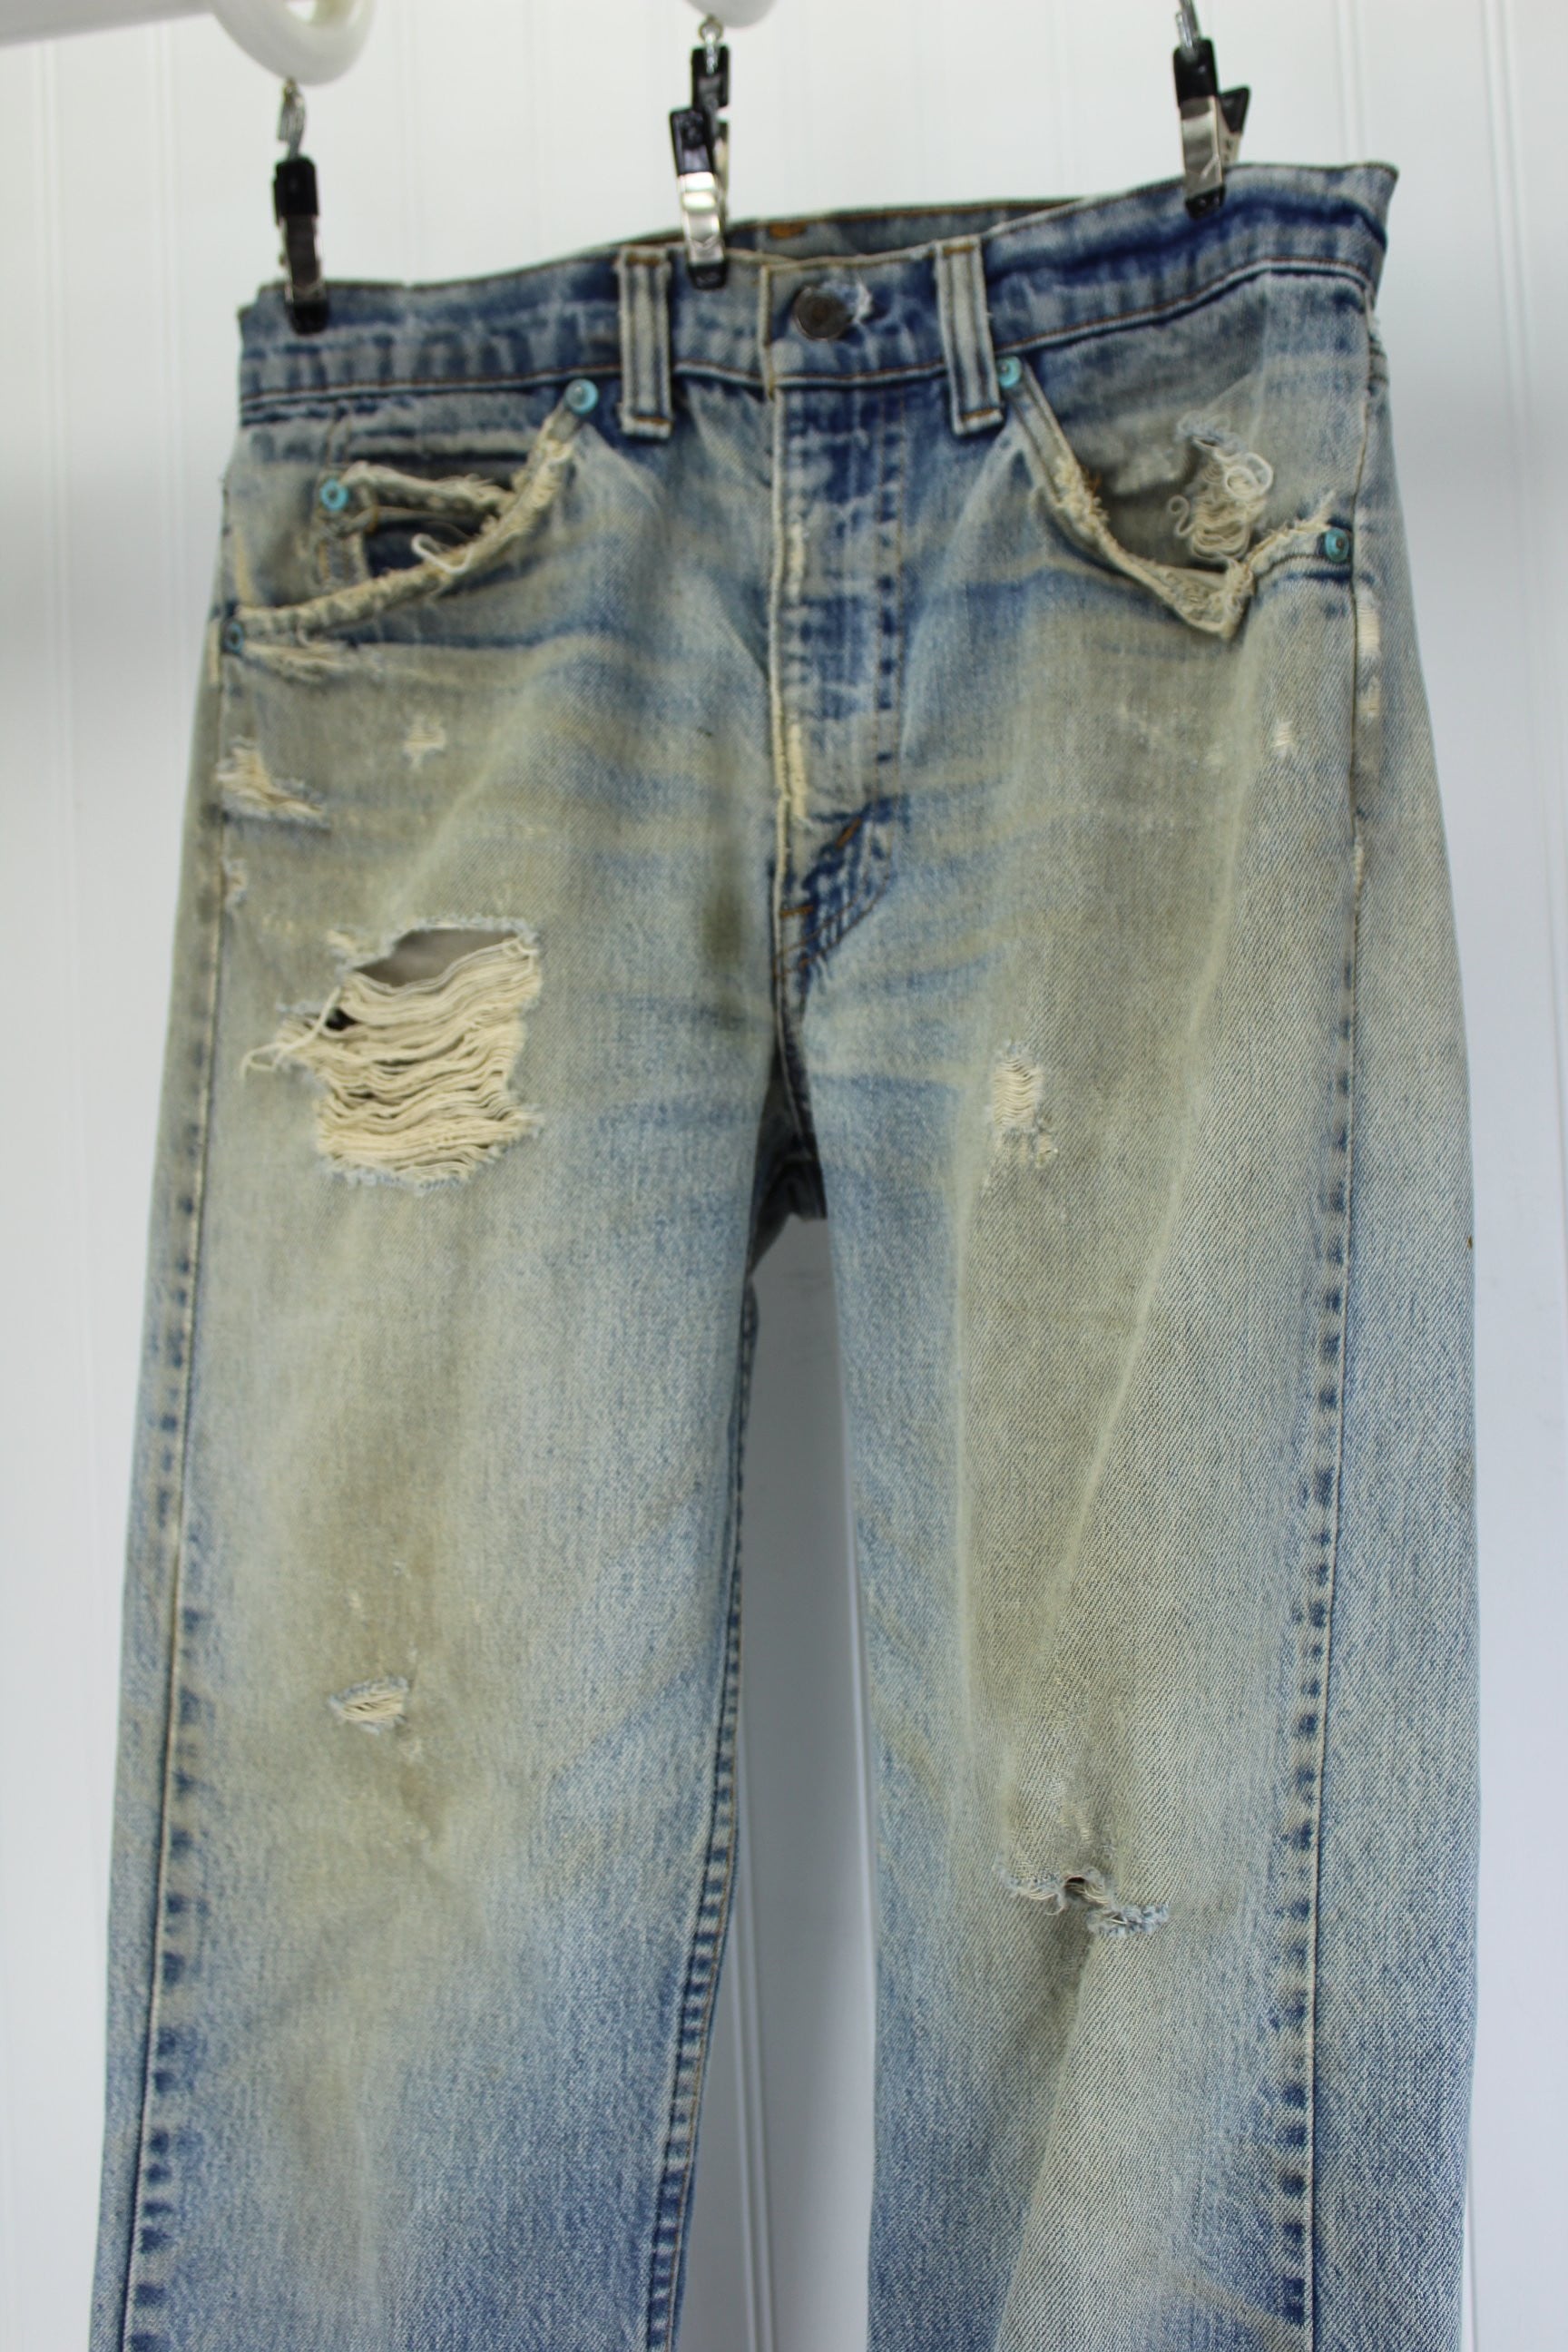 Vintage Levi's Skater Boarder Heavy Distress Grunge Jeans - Early 1990s - Orange Tab none like this one